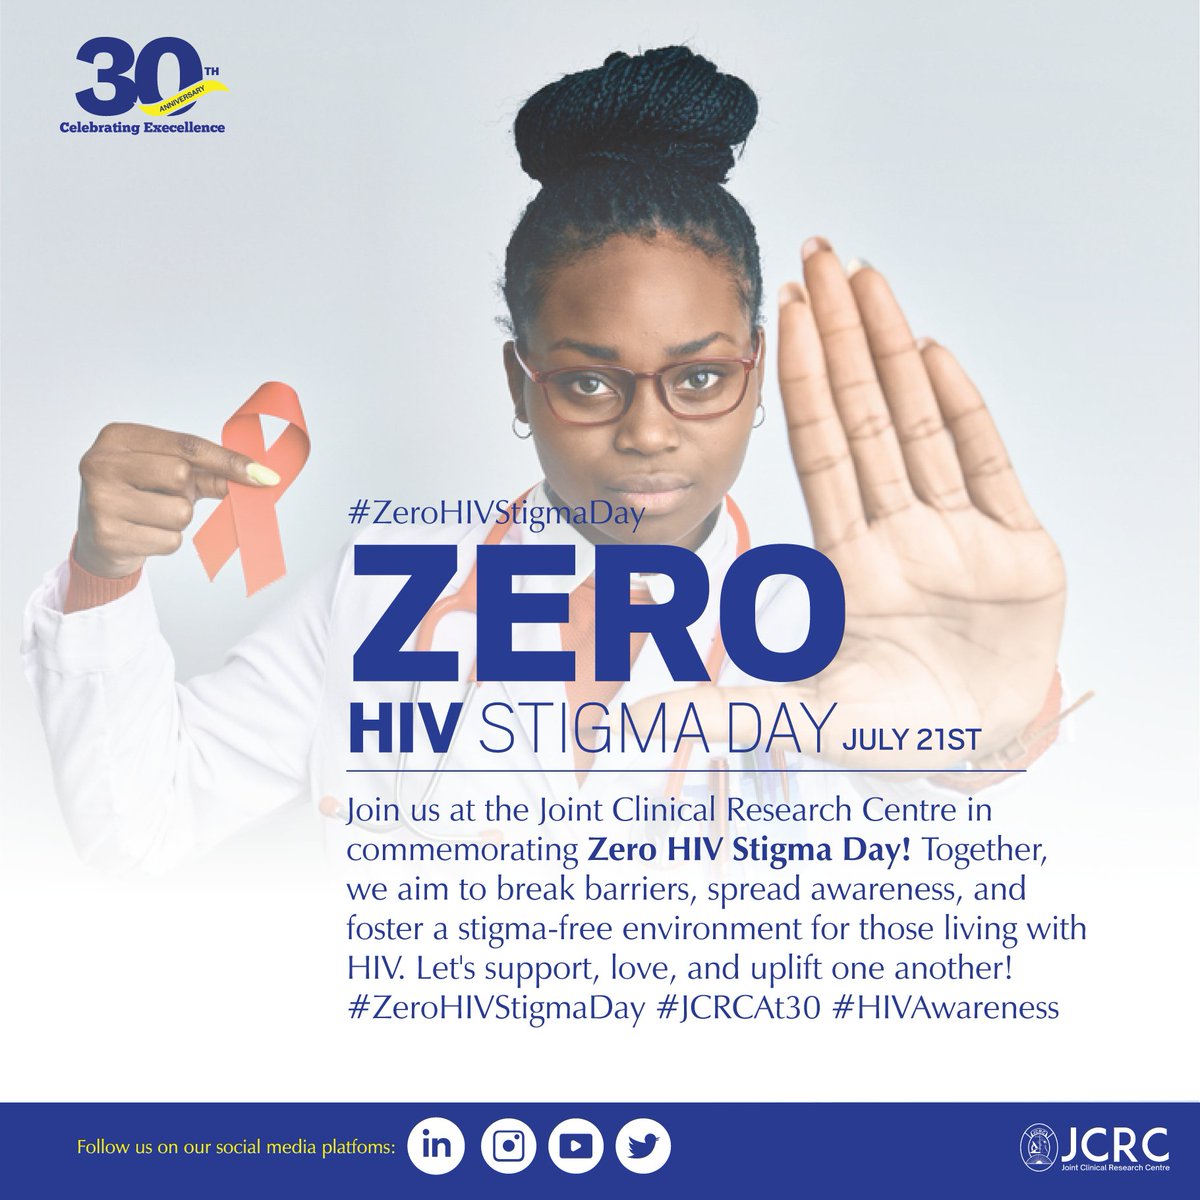 Unite to end HIV stigma! Embrace compassion and knowledge. Together, we can break the barriers, support those affected, and build a world free from judgment. #ZeroHIVStigmaDay #EndStigma #HIVAwareness #JCRCAt30 #CelebratingExcellence